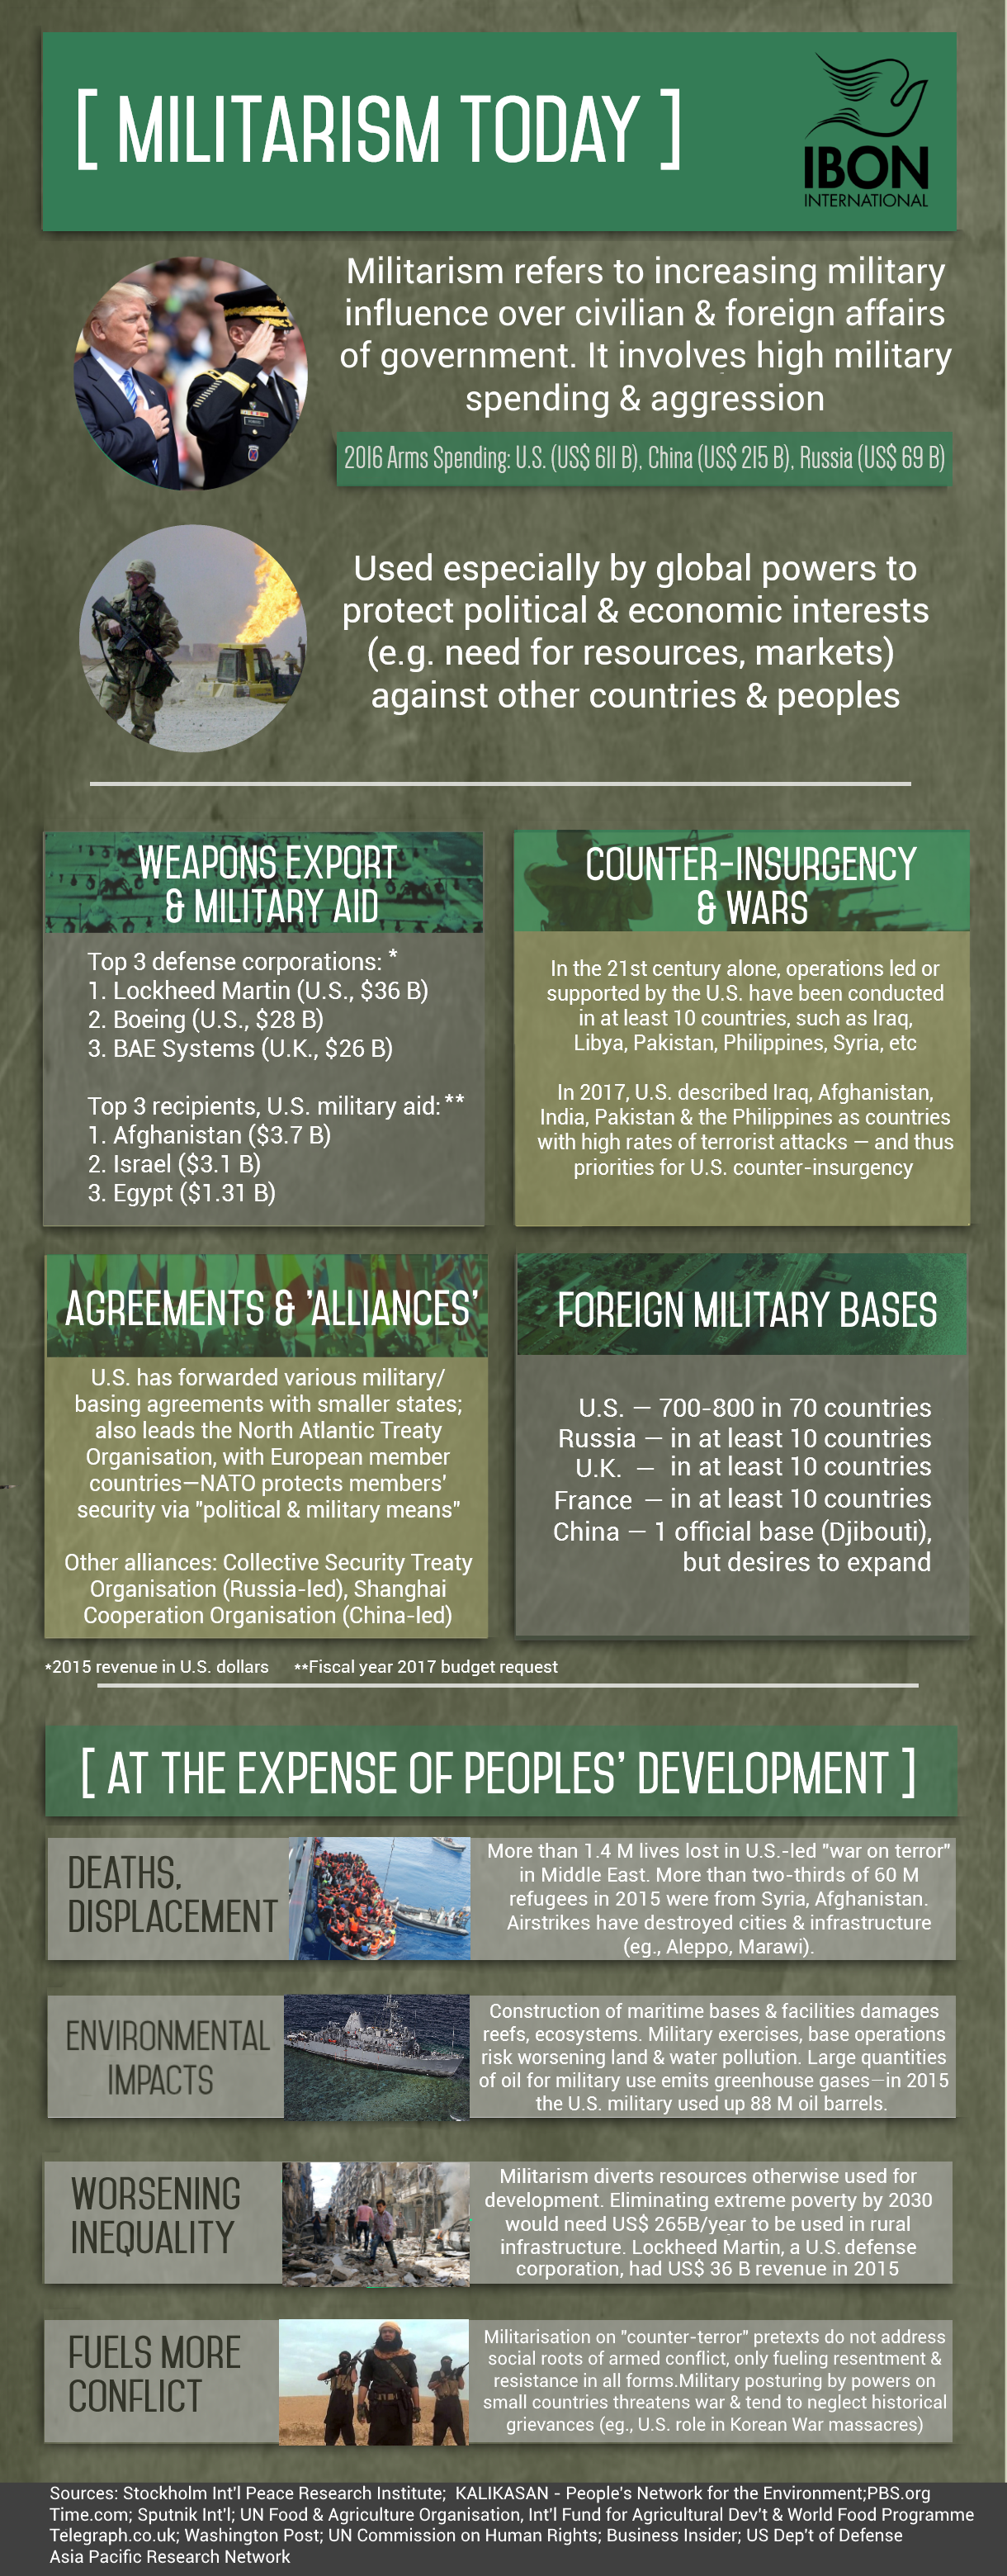 Militarism Today (Infographic)